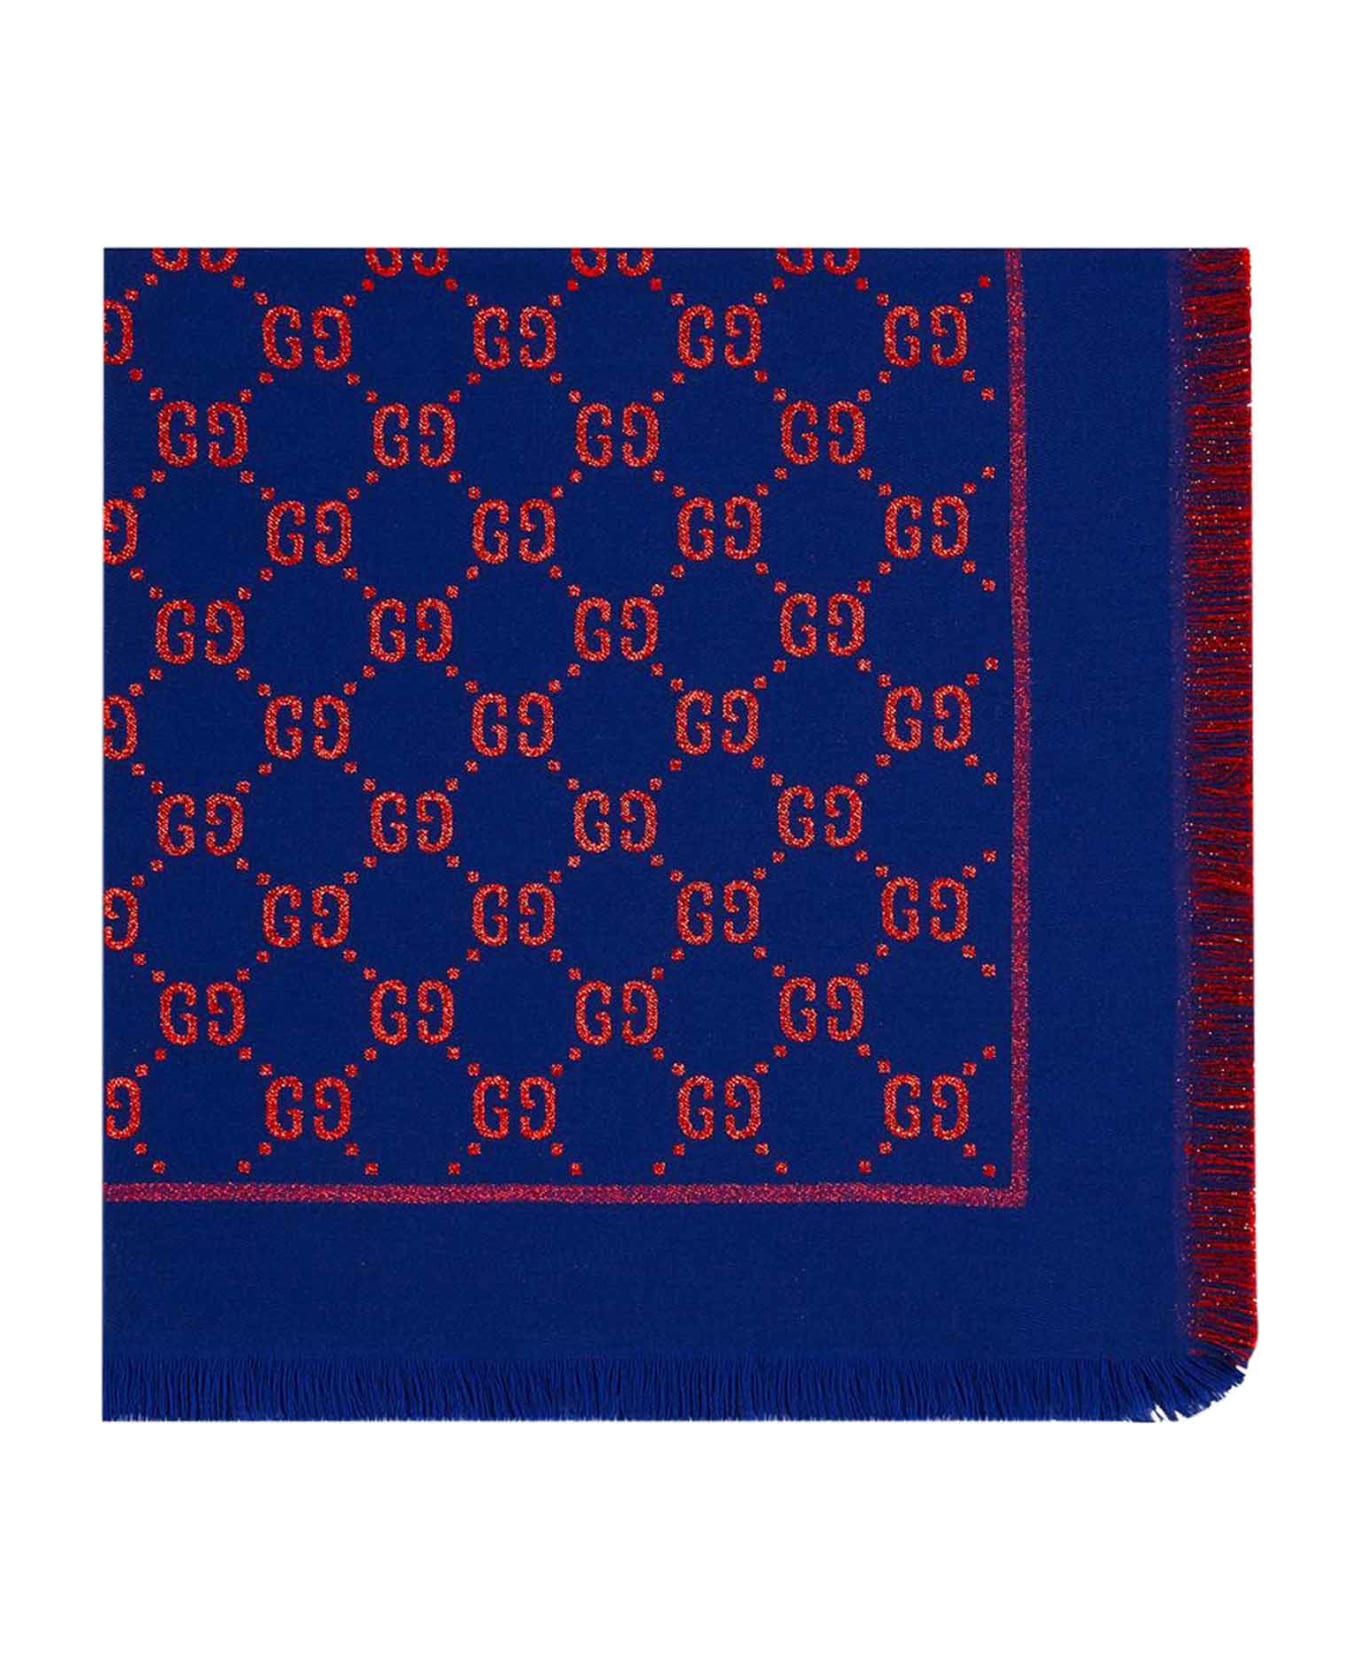 Gucci Blue / Red Scarf Baby Unisex - Blu/rosso